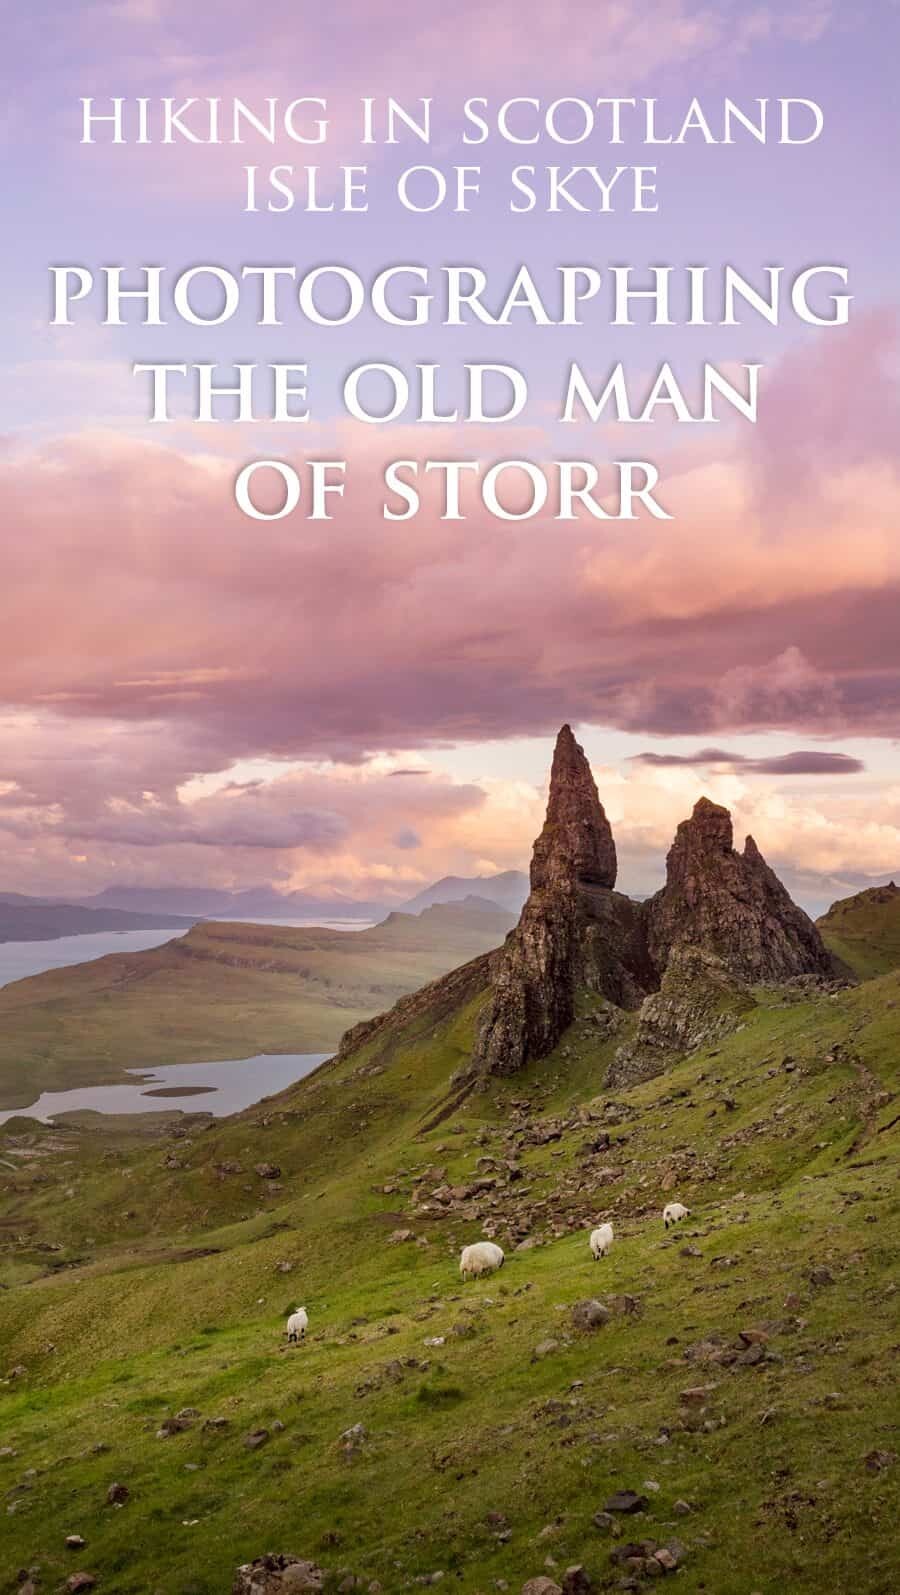 Old Man of Storr Hike on the Isle of Skye, Scotland by The Wandering Lens photographer Lisa Michele Burns